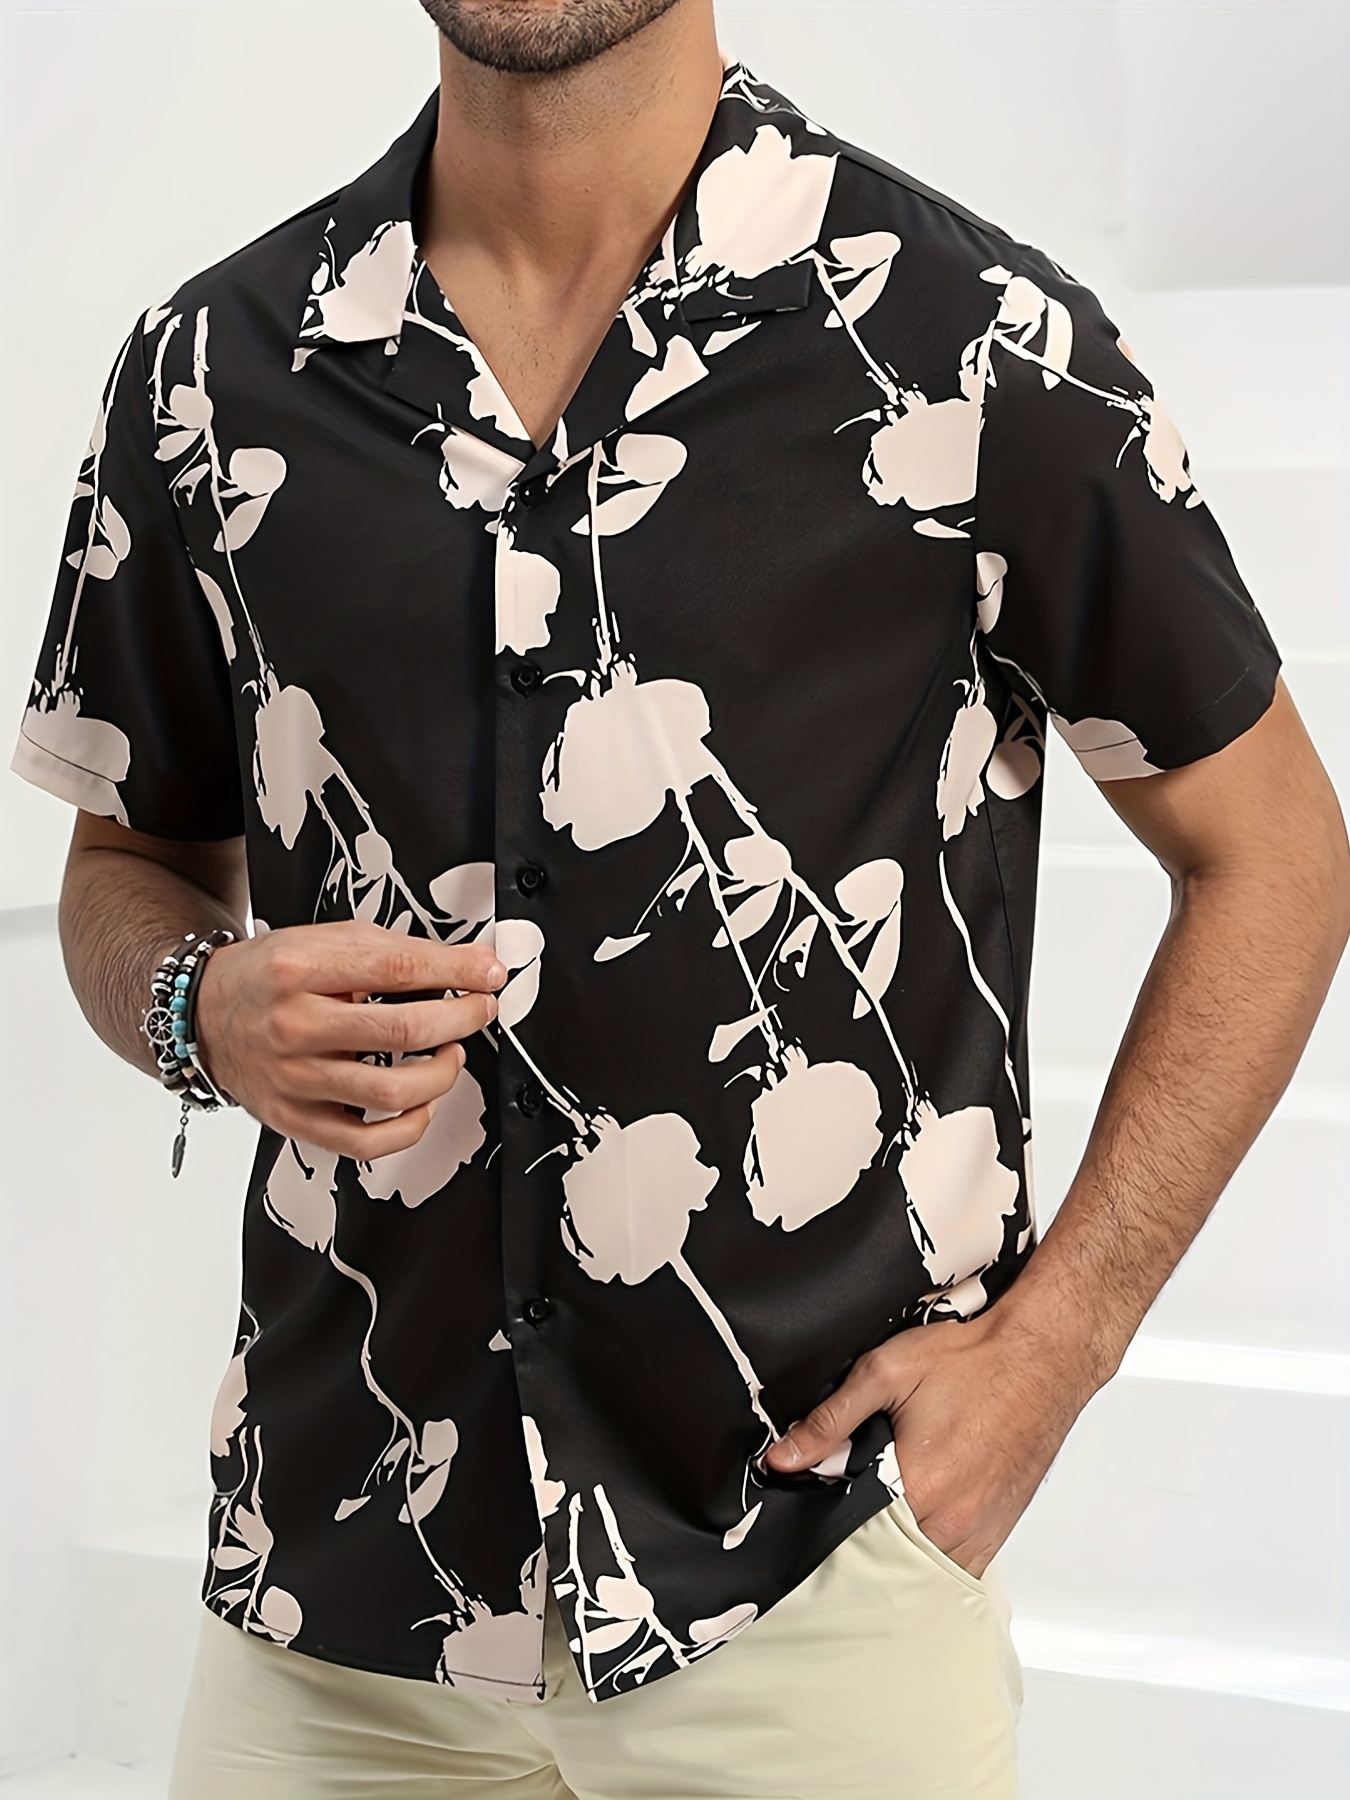 Men's Casual Abstract Pattern Short Sleeve Shirt, Male Clothes For